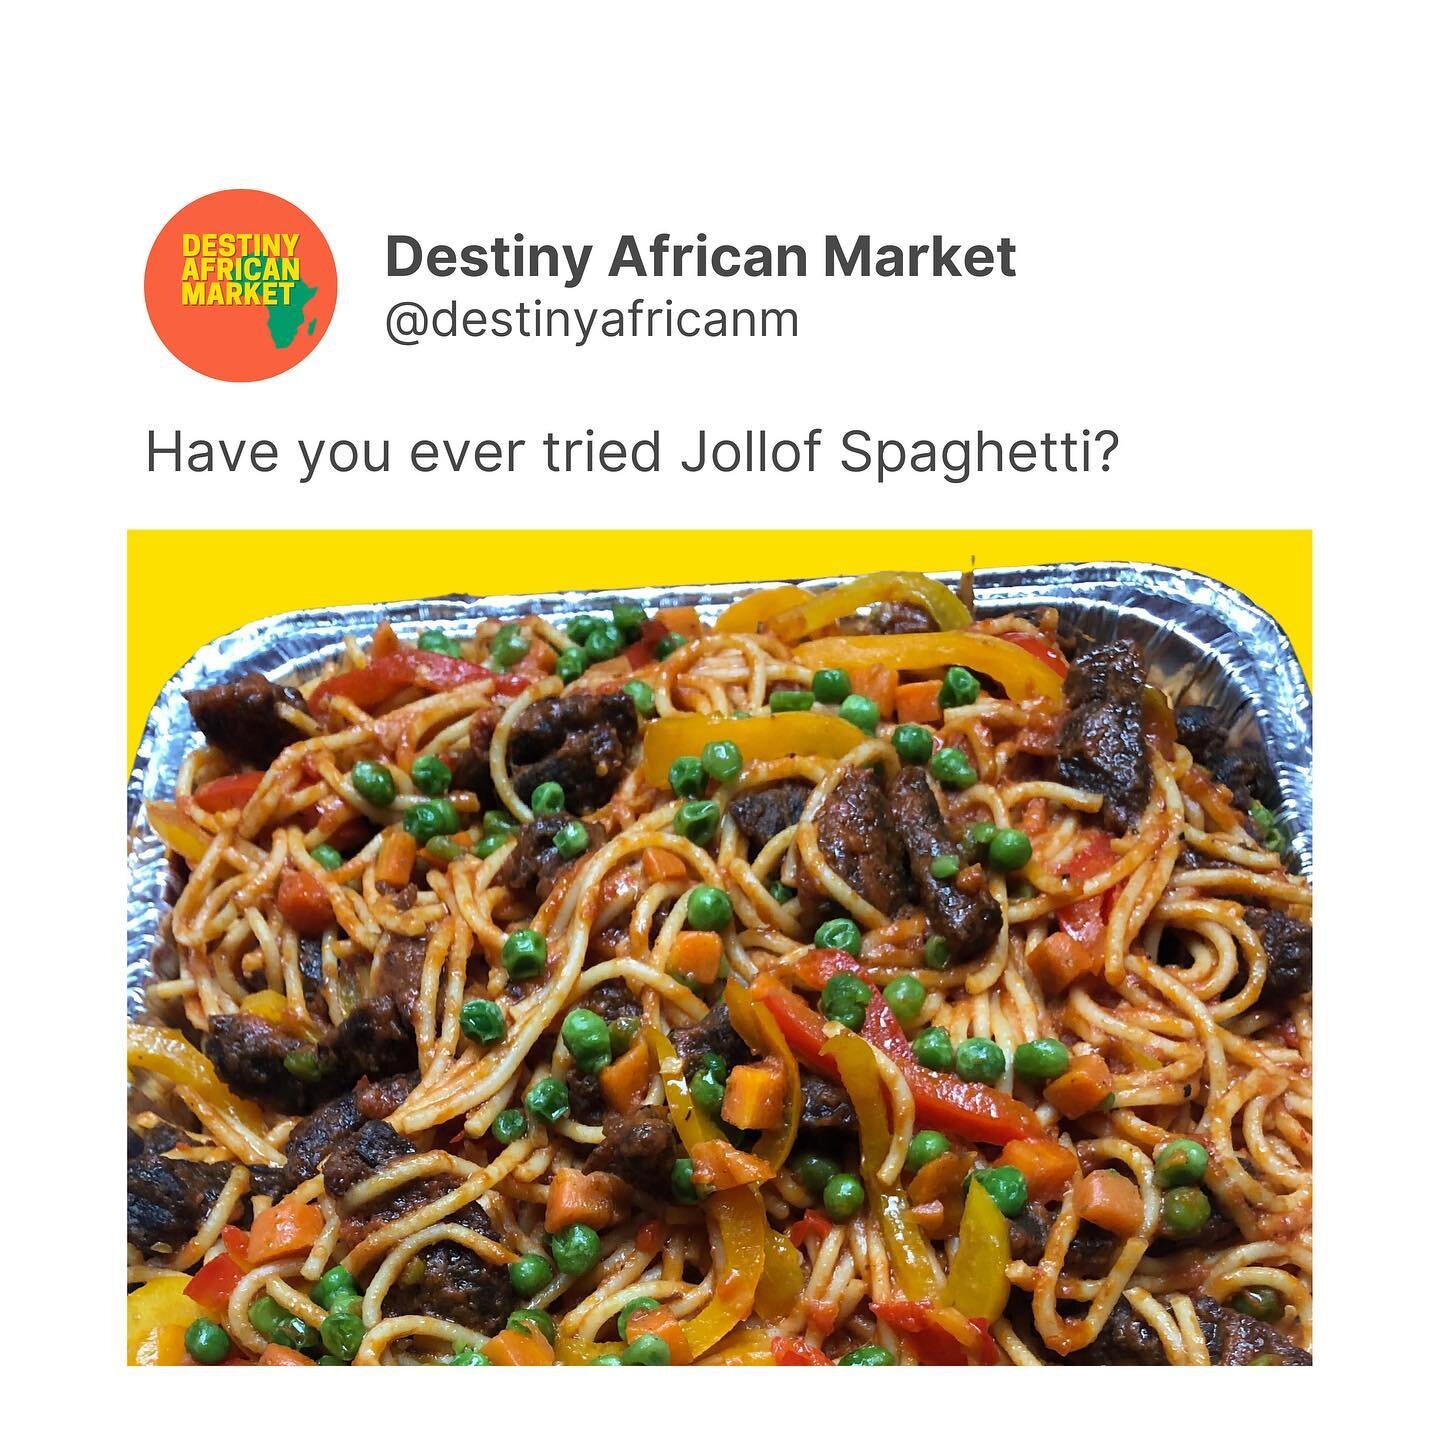 Don&rsquo;t knock it until you try! Jollof Spaghetti is ELITE ❤️&zwj;🔥! You&rsquo;re gonna wanna have it FOREVER after tasting ours 😋
⠀
You can order it online at destinyafricanmarket.com/catering
⠀
THANK US LATER!
⠀
#Afrofusion #Jollof #JollofSpag